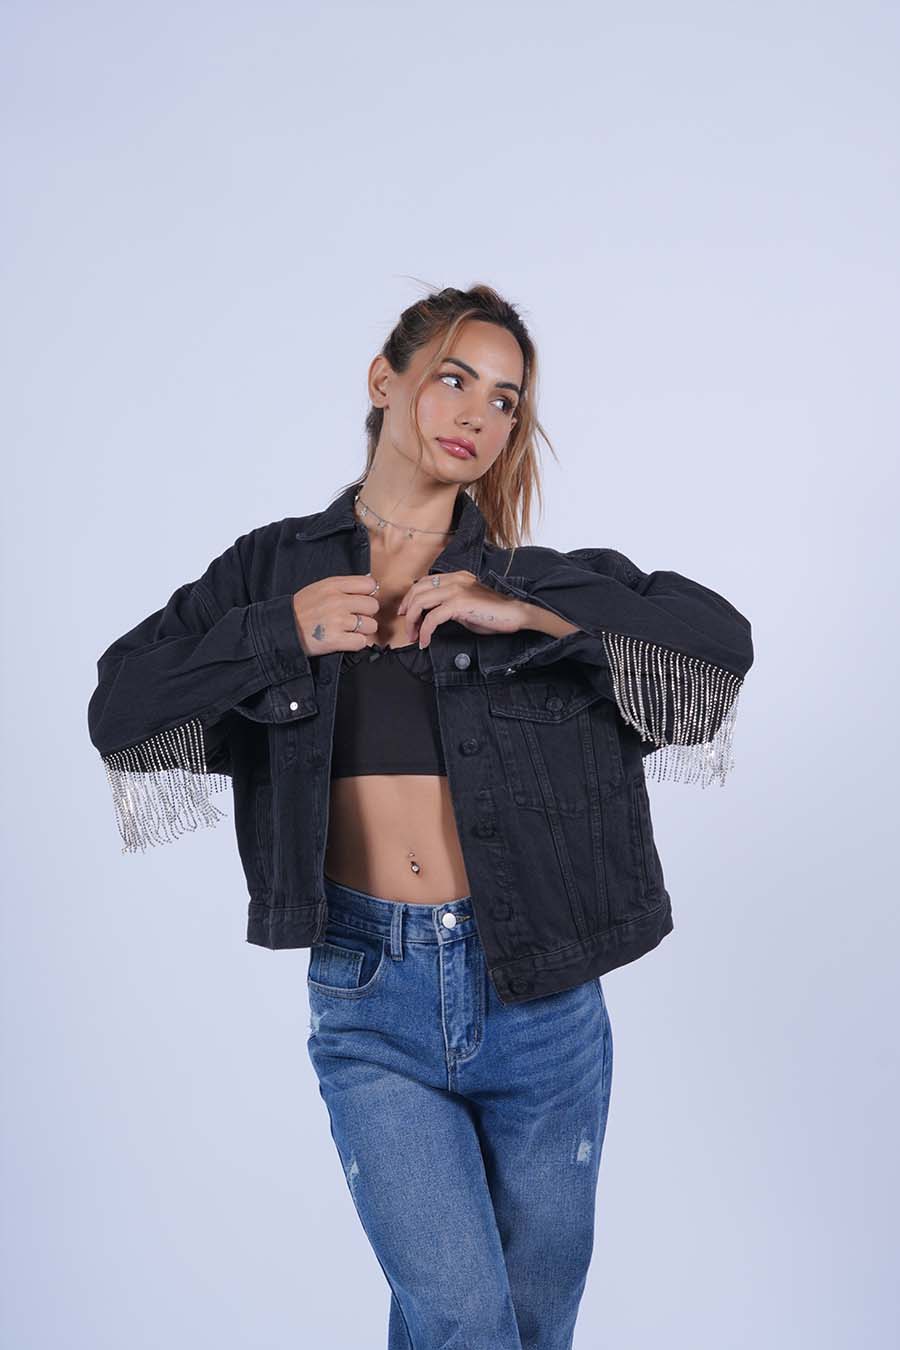 FRINGE FOREVER YOUNG VALKYRE JACKETS